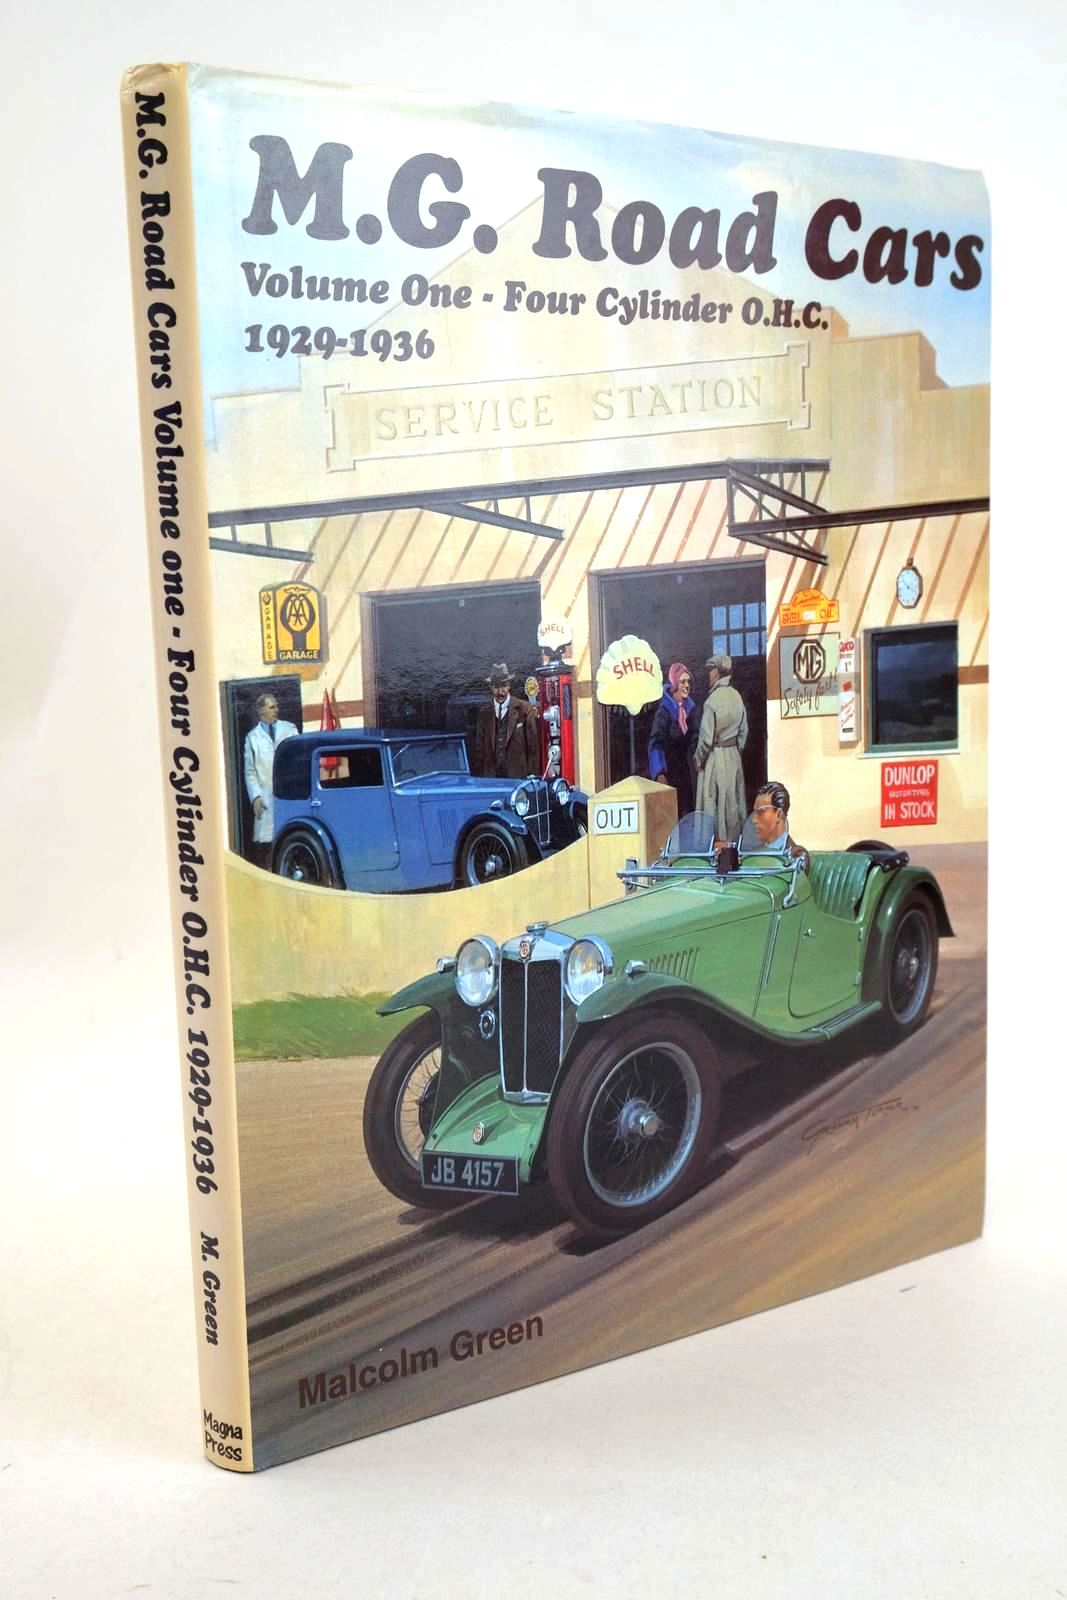 Photo of M.G. ROAD CARS VOLUME ONE - FOUR CYLINDER O.H.C. 1929-1936 written by Green, Malcolm et al,  published by Magna Press (STOCK CODE: 1327283)  for sale by Stella & Rose's Books